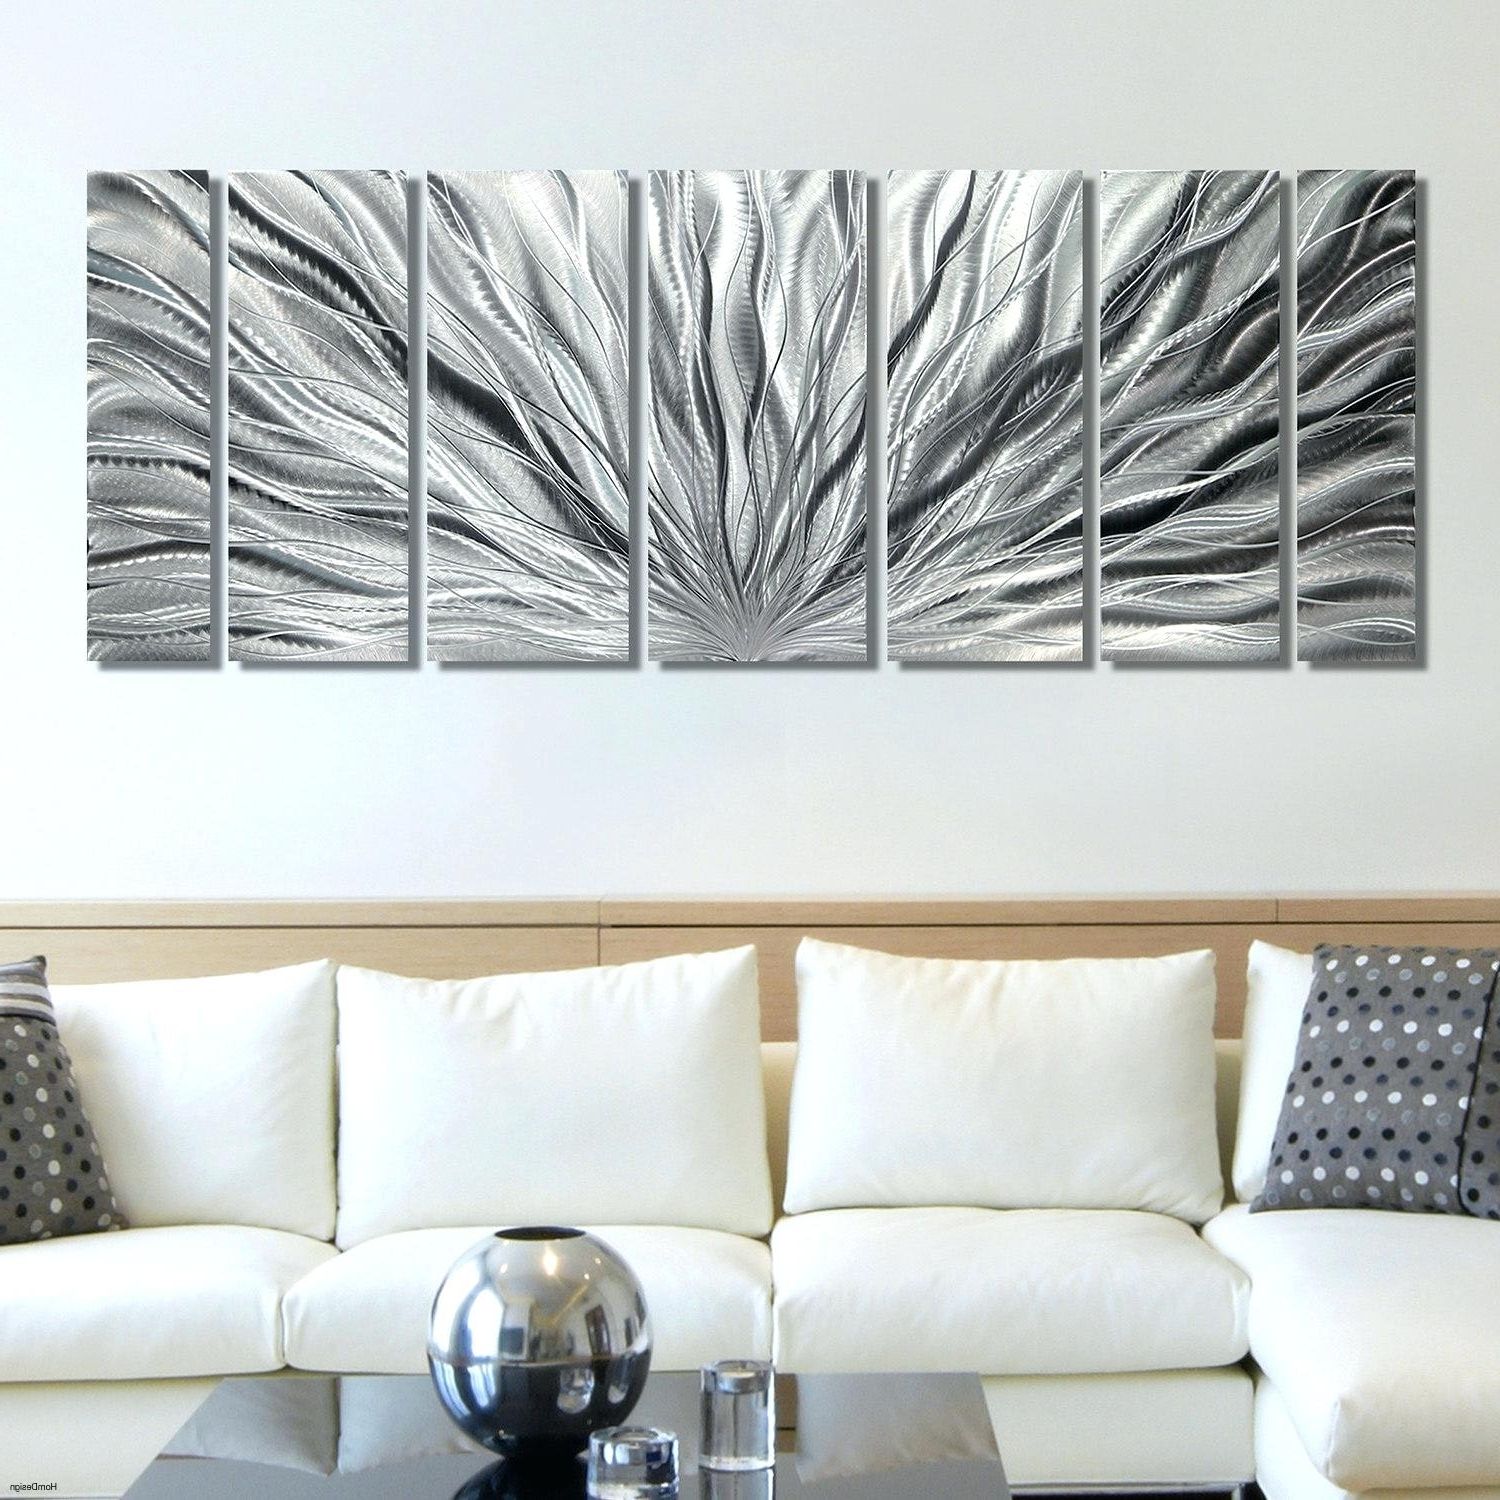 The 15 Best Collection of Kirkland Abstract Wall Art